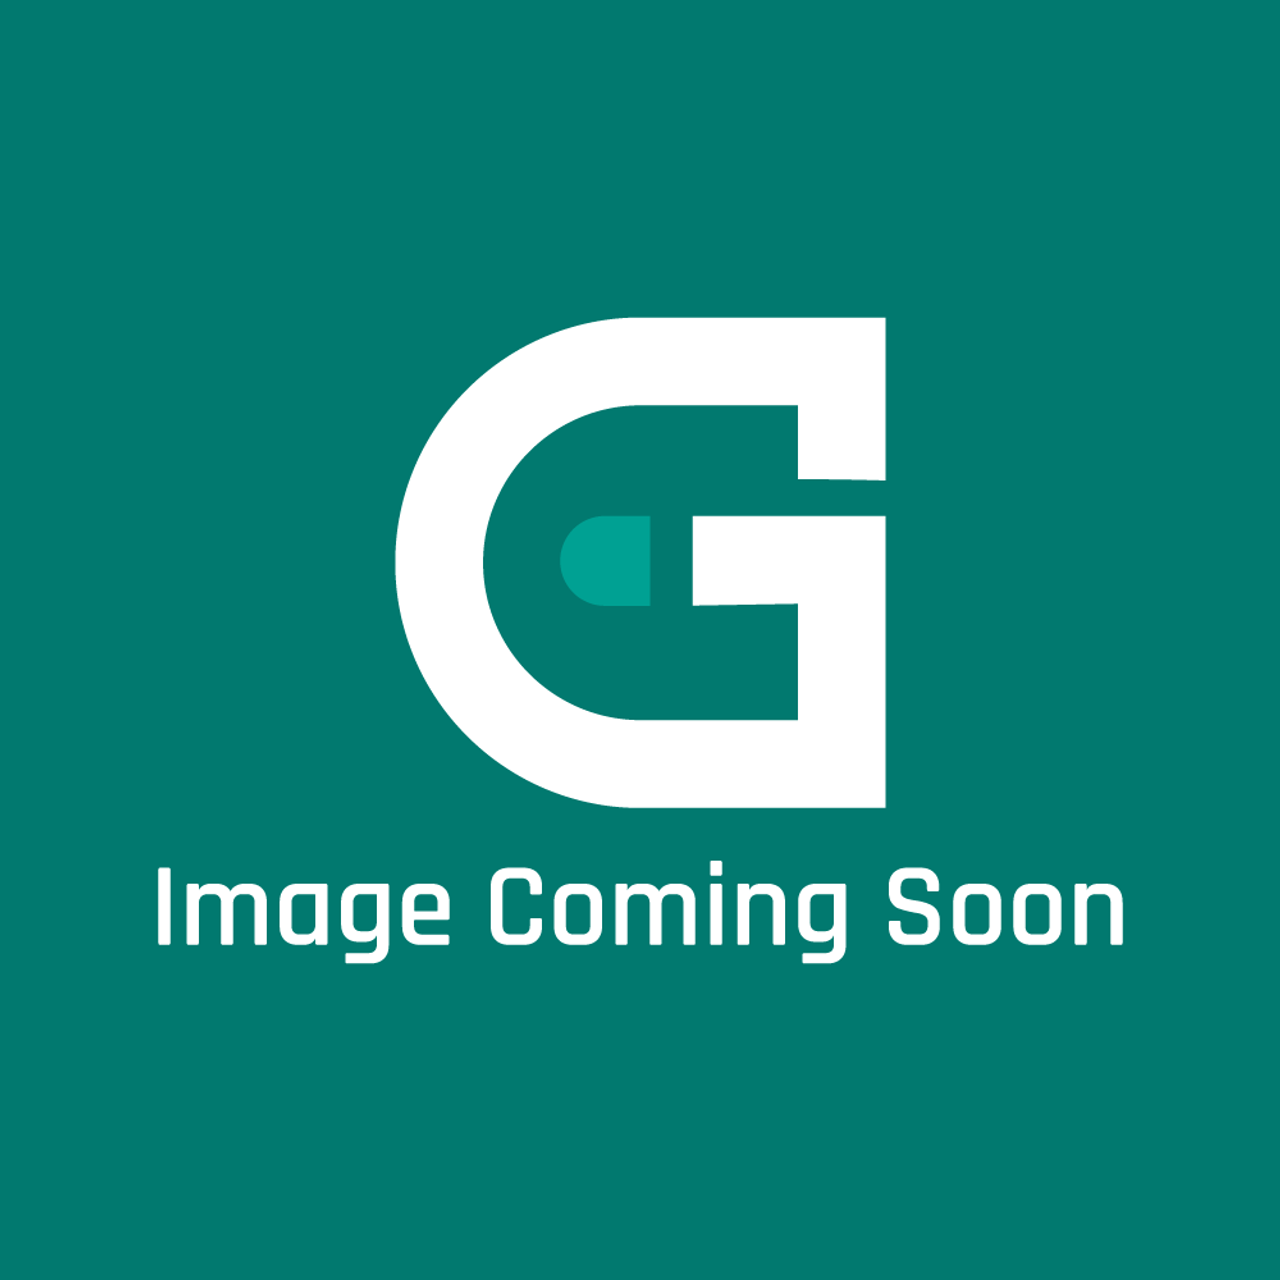 Delfield 2186960 - Harness, 4460-72 Main/Ct L Open - Image Coming Soon!